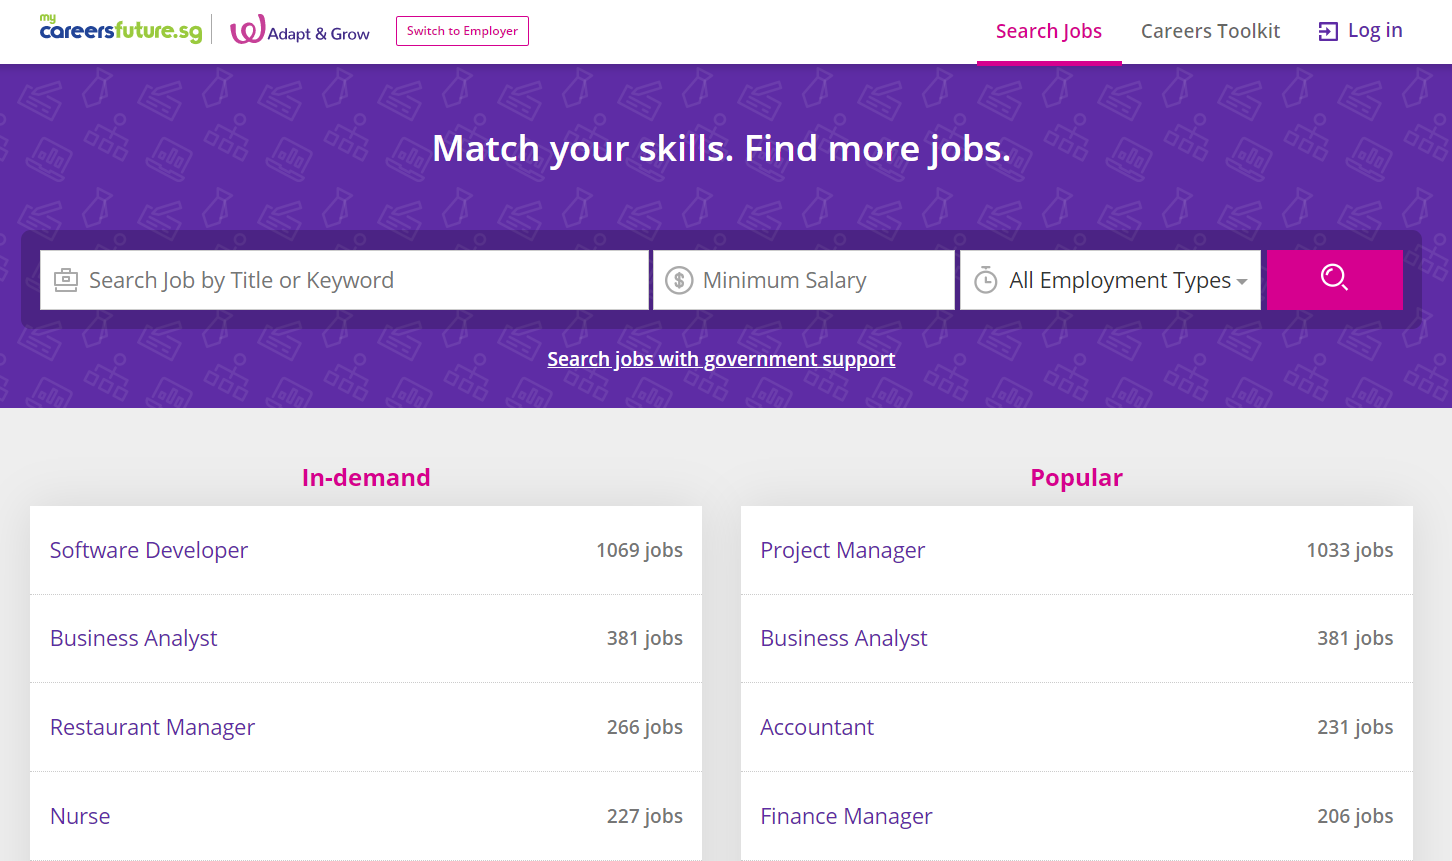 MyCareersFuture is an online government career portal that facilitates job matching for Singaporeans